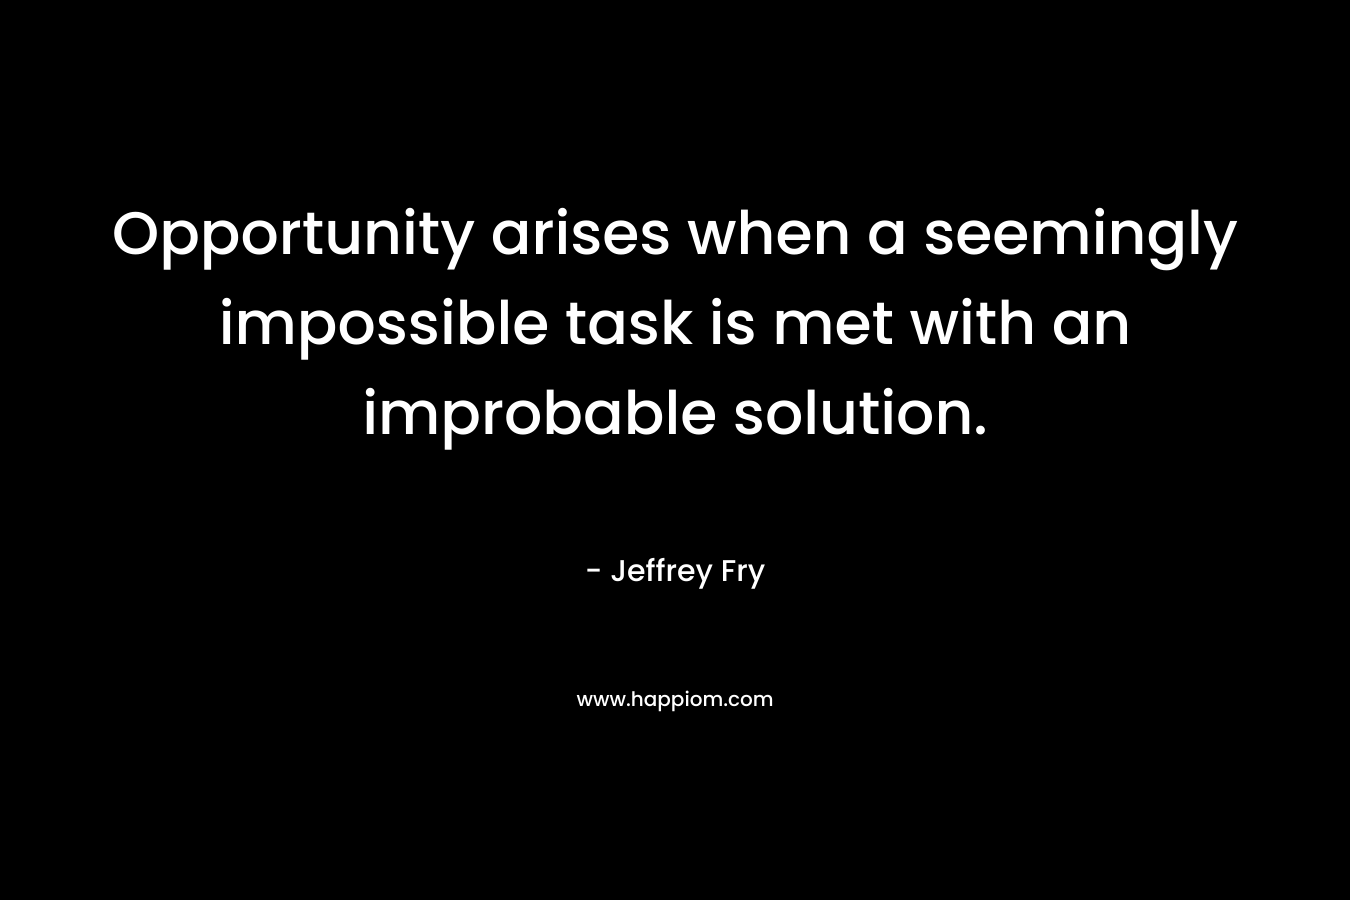 Opportunity arises when a seemingly impossible task is met with an improbable solution. – Jeffrey Fry